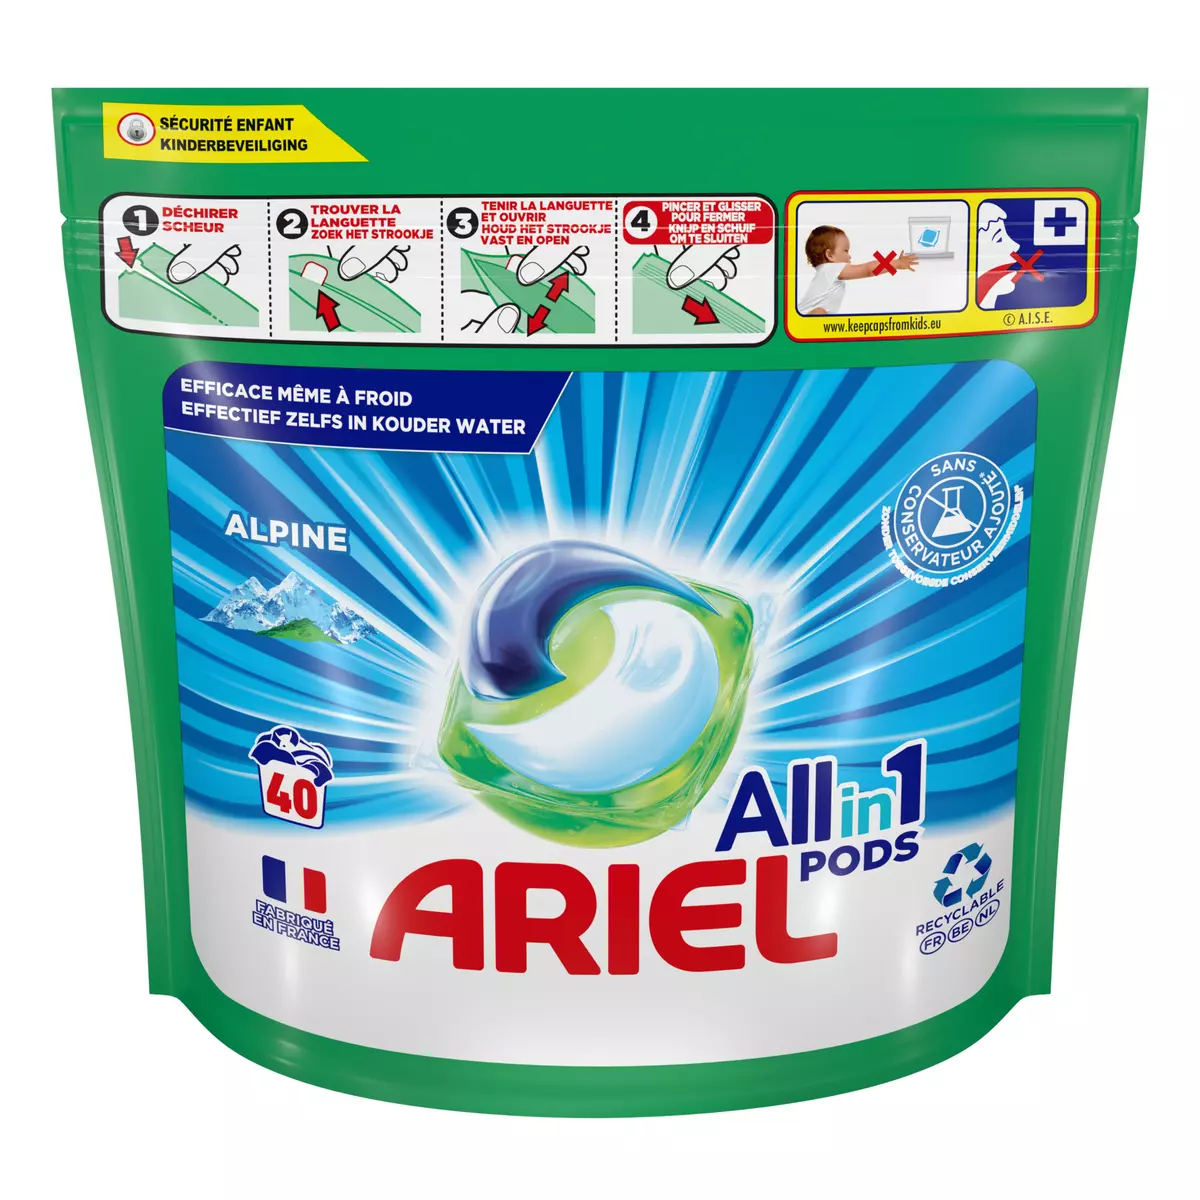 Ariel - All in1 pods + lenor unstoppables lessive en capsules 40 lavages, Delivery Near You